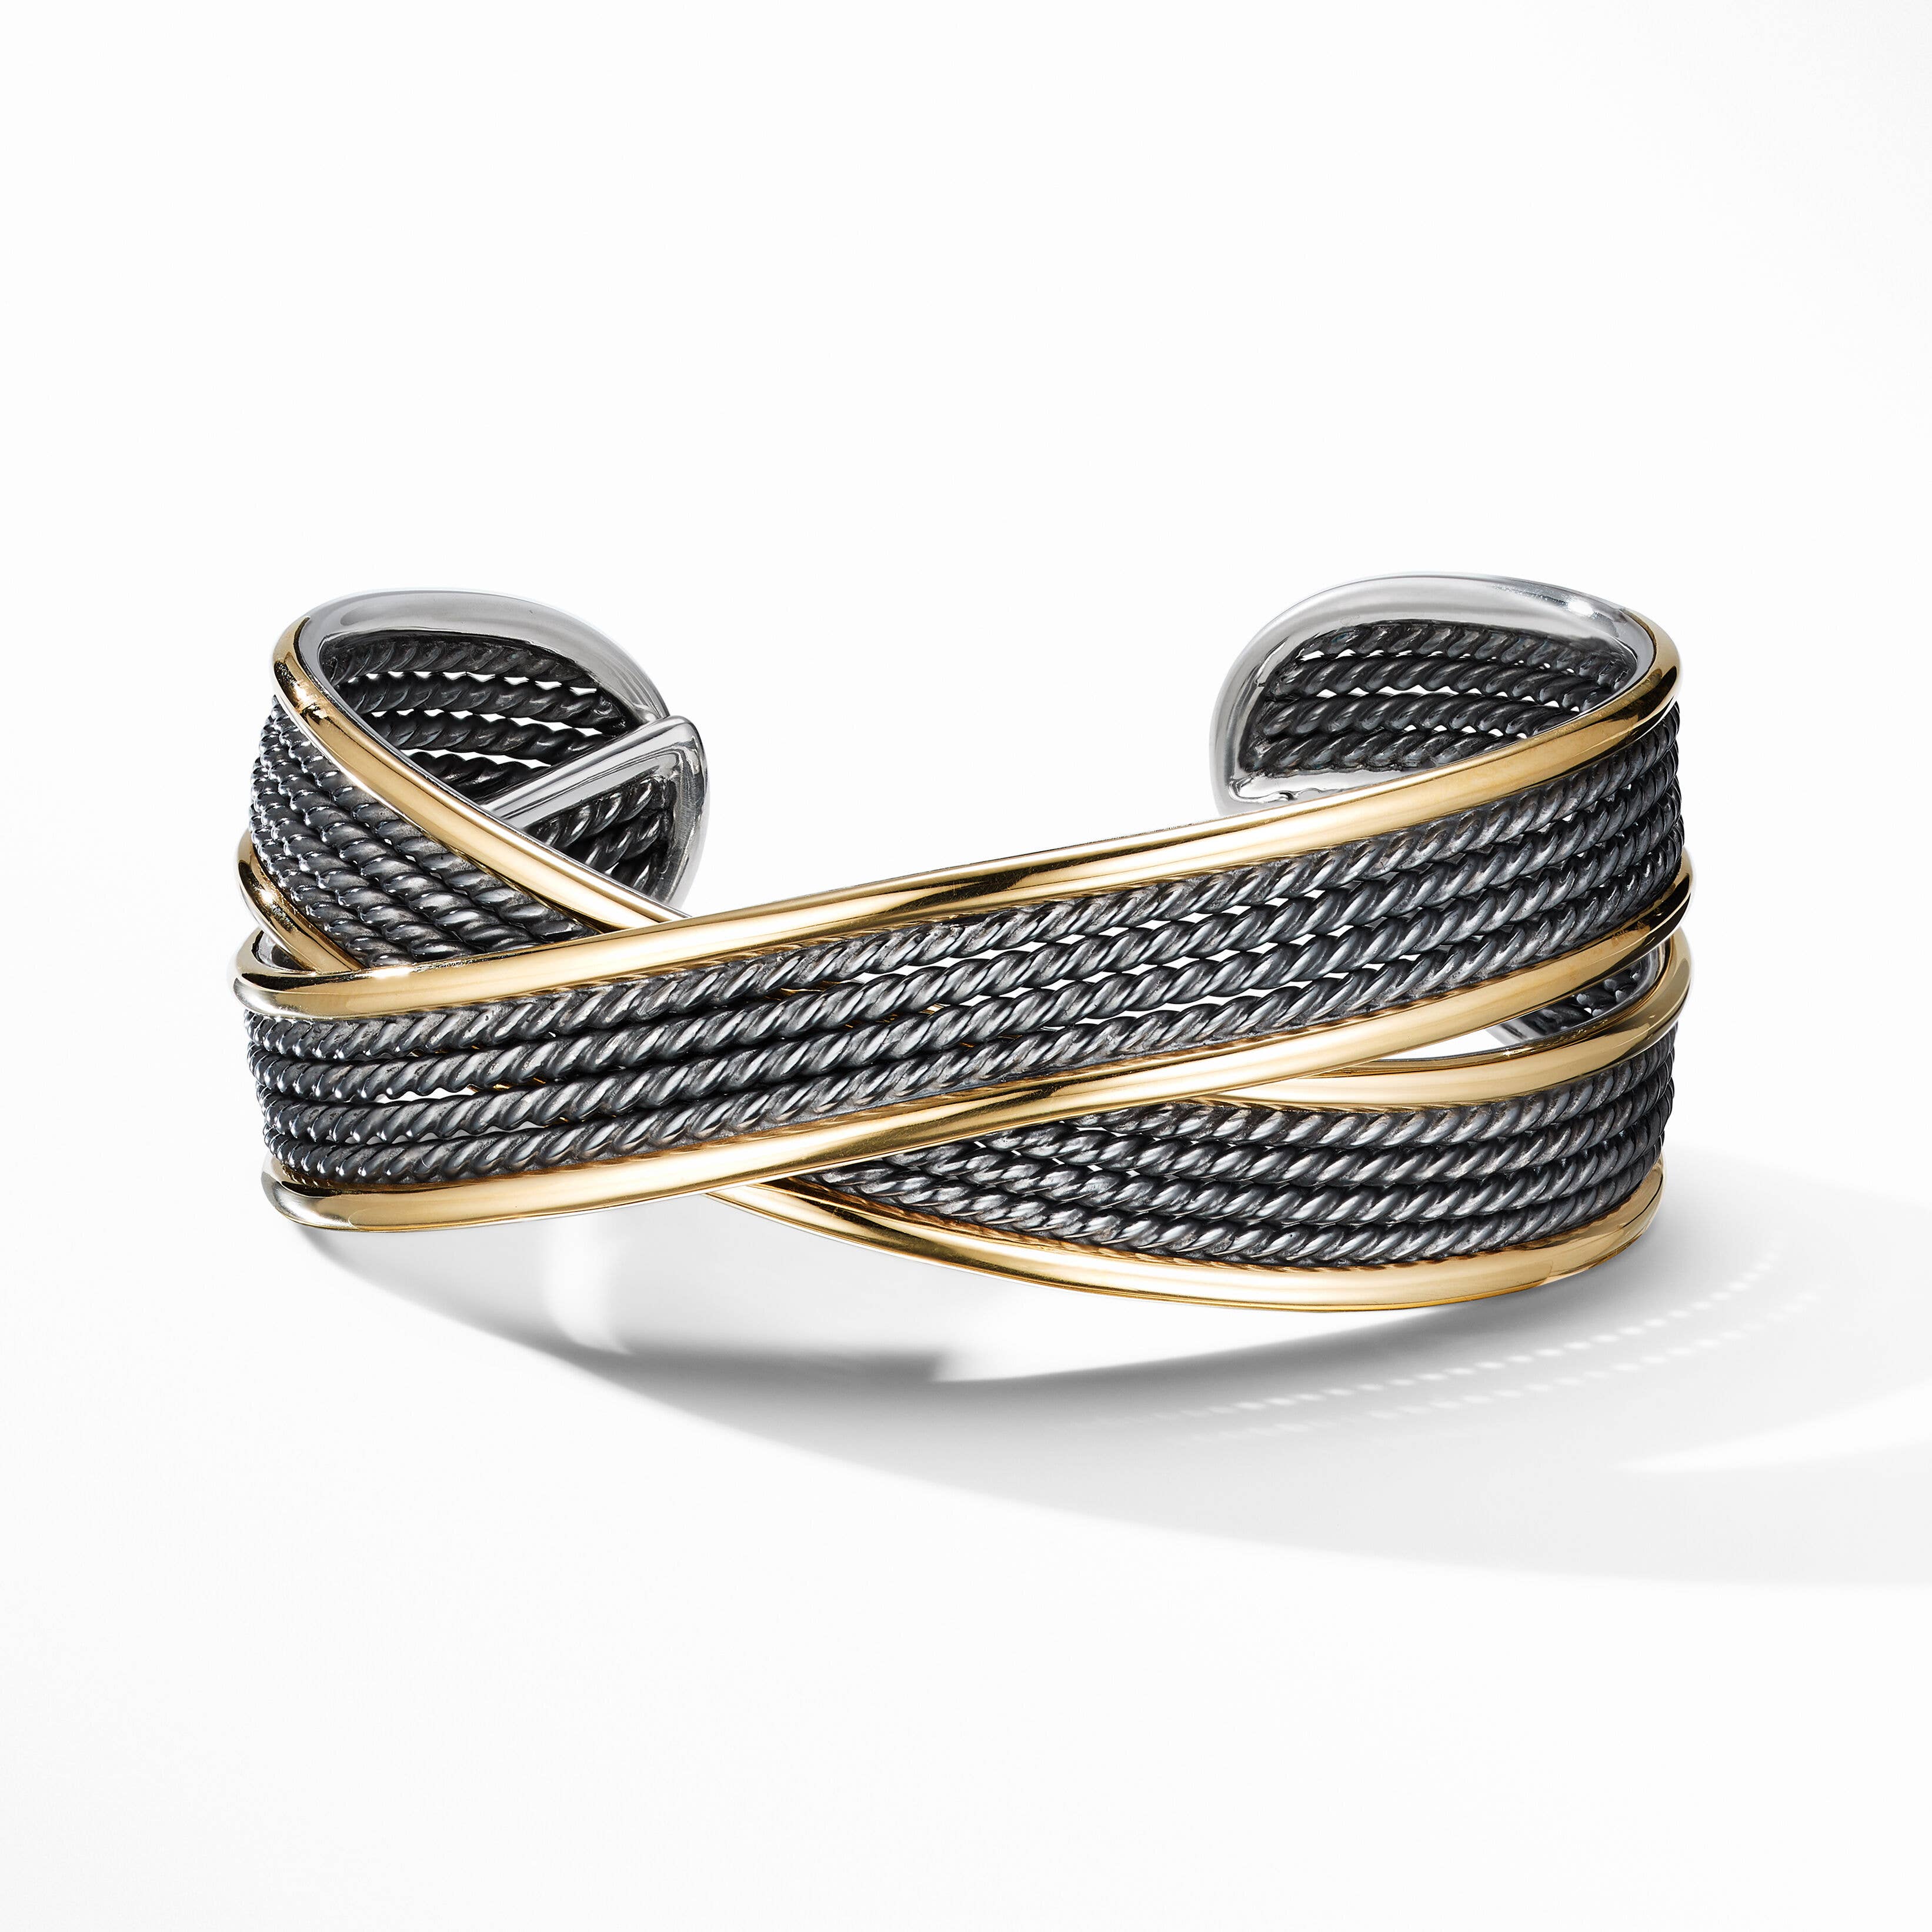 DY Origami Cuff Bracelet in Blackened Silver with 18K Yellow Gold